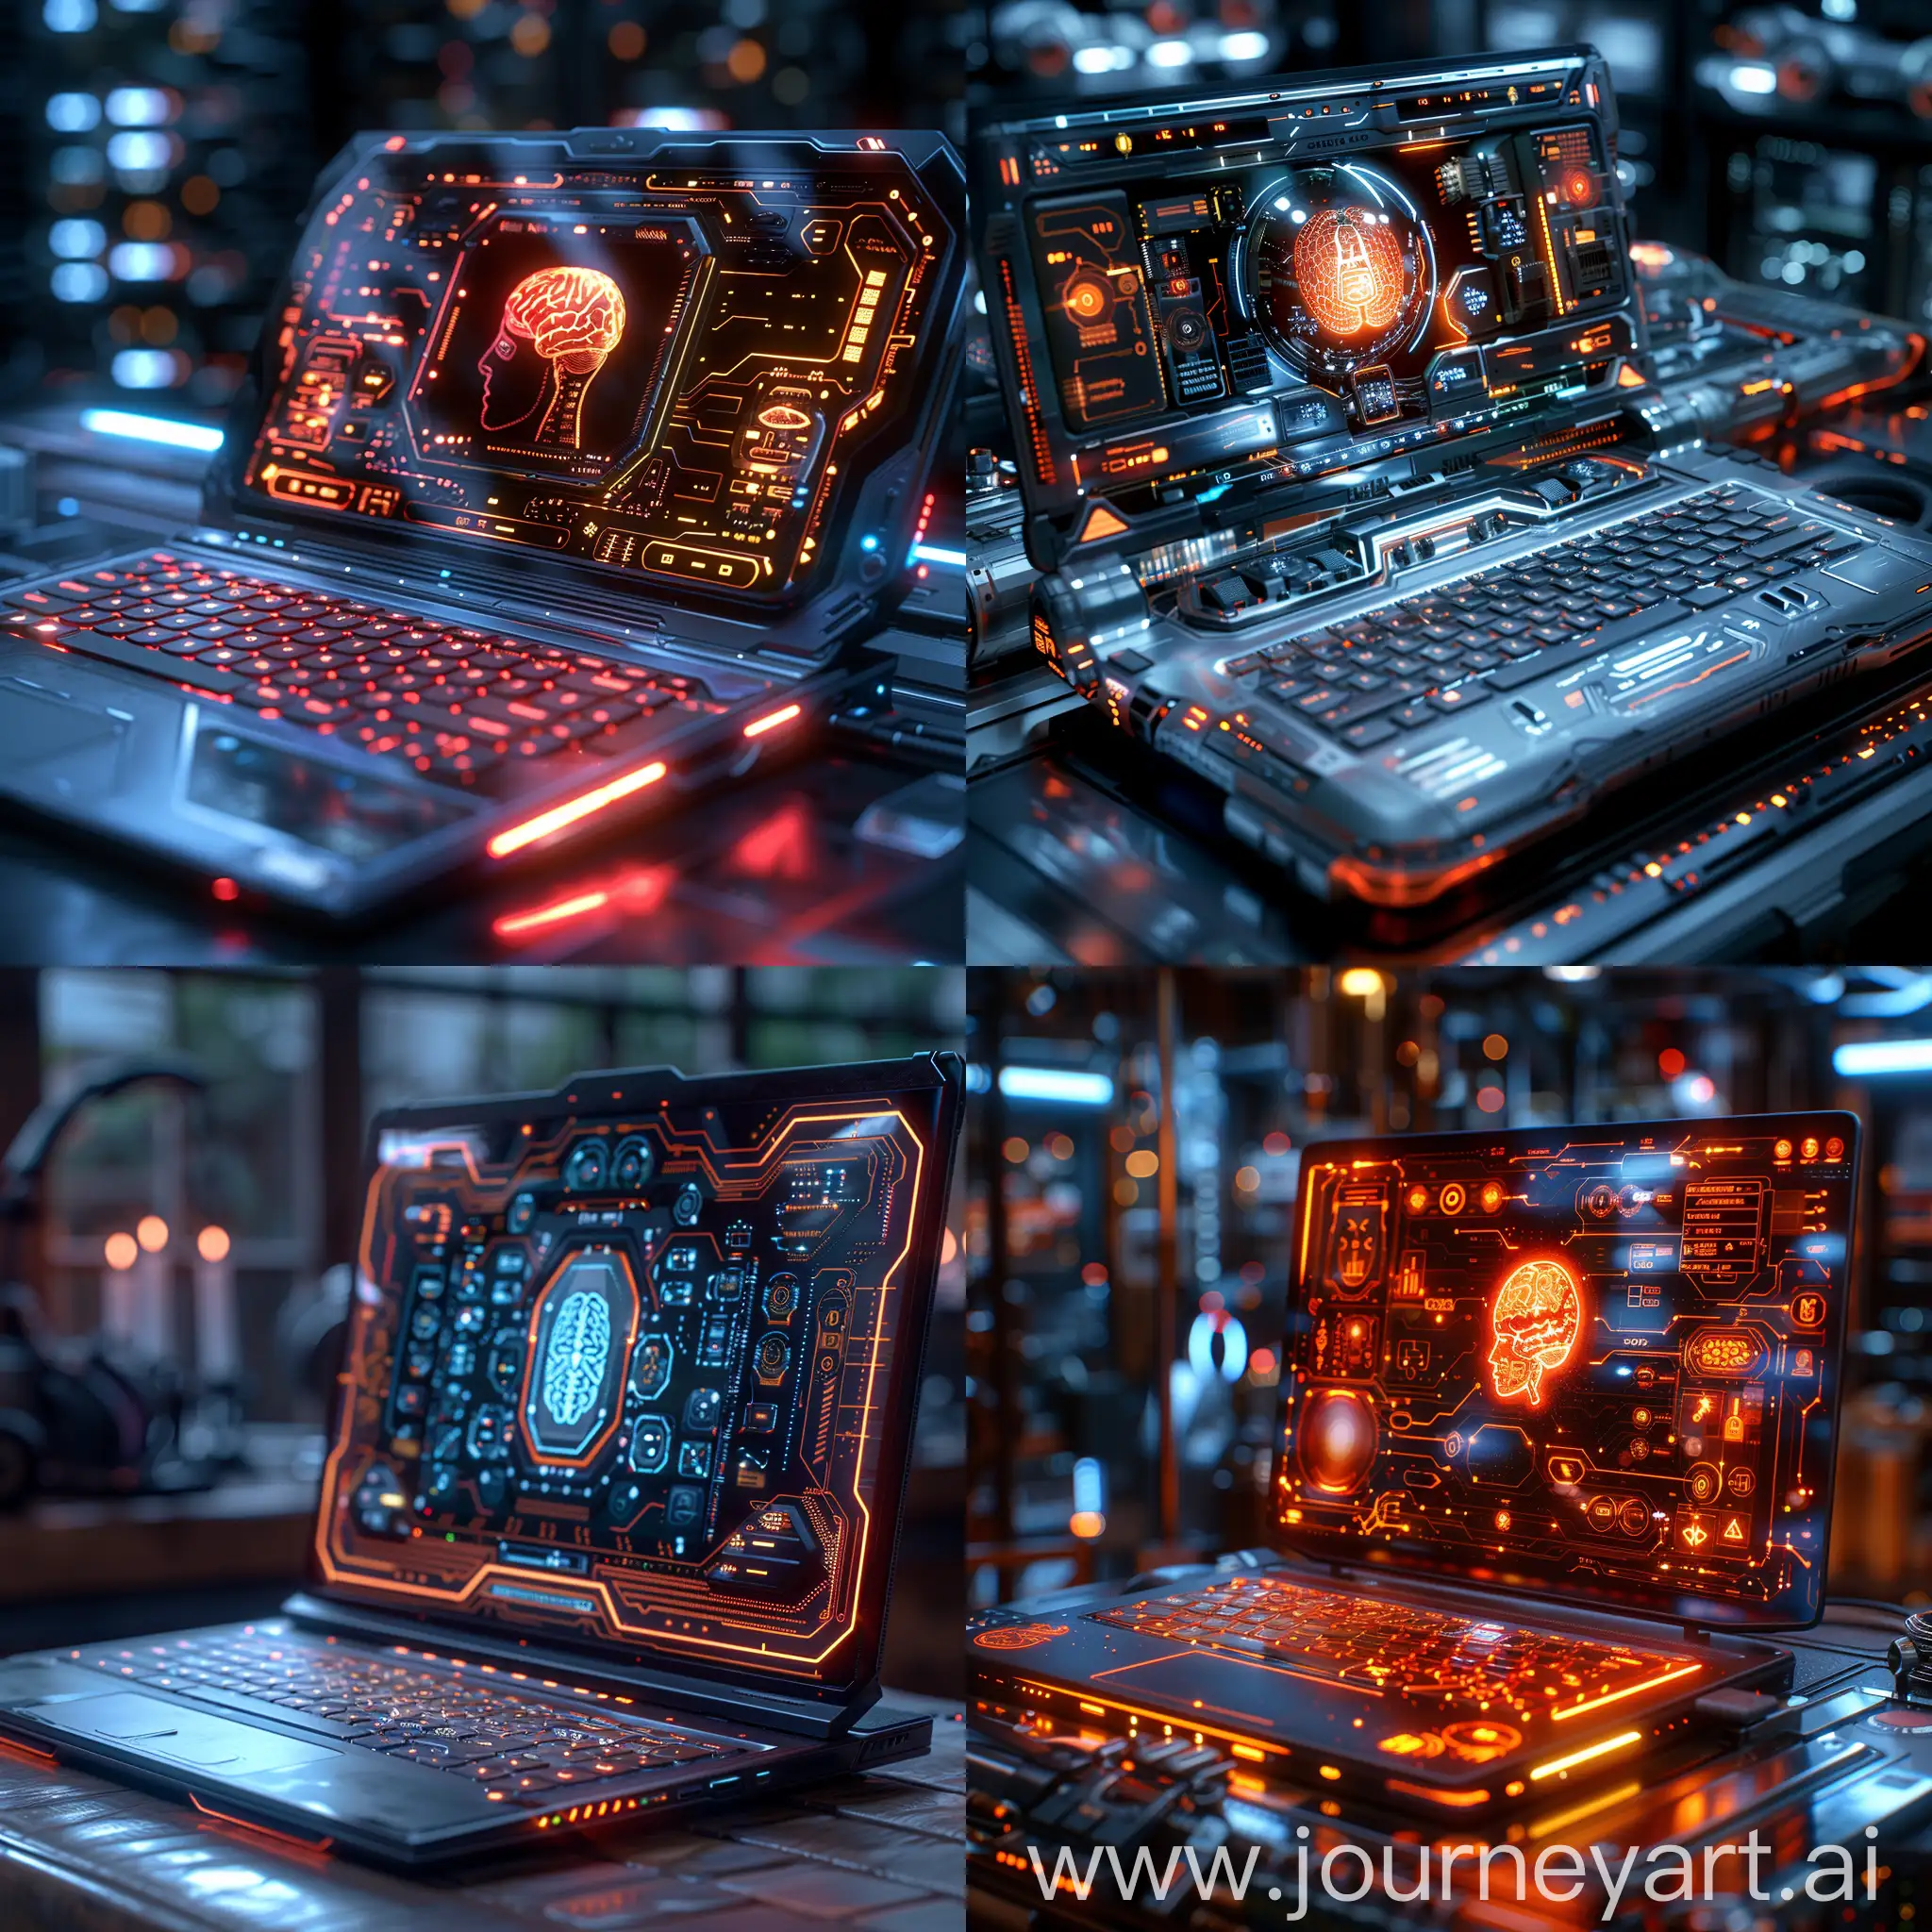 Futuristic-Laptop-with-Morphing-Marvels-and-Holographic-Interfaces